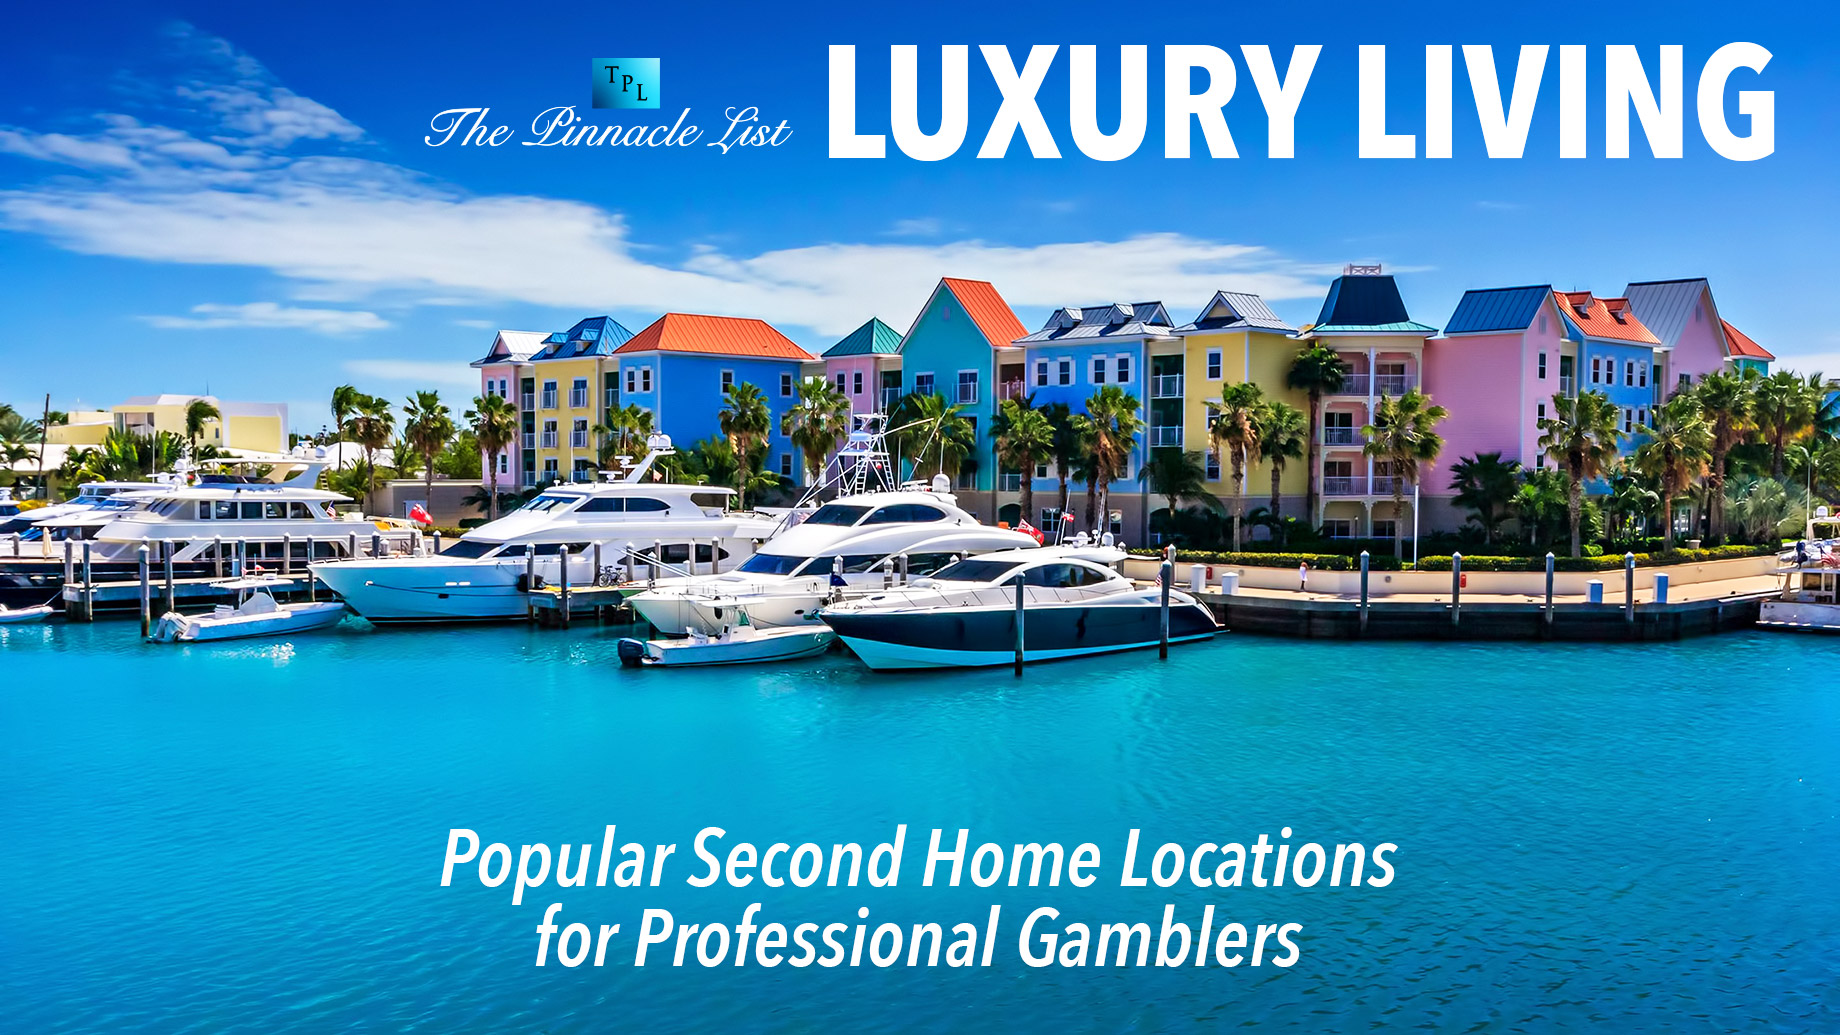 Luxury Living – Popular Second Home Locations for Professional Gamblers